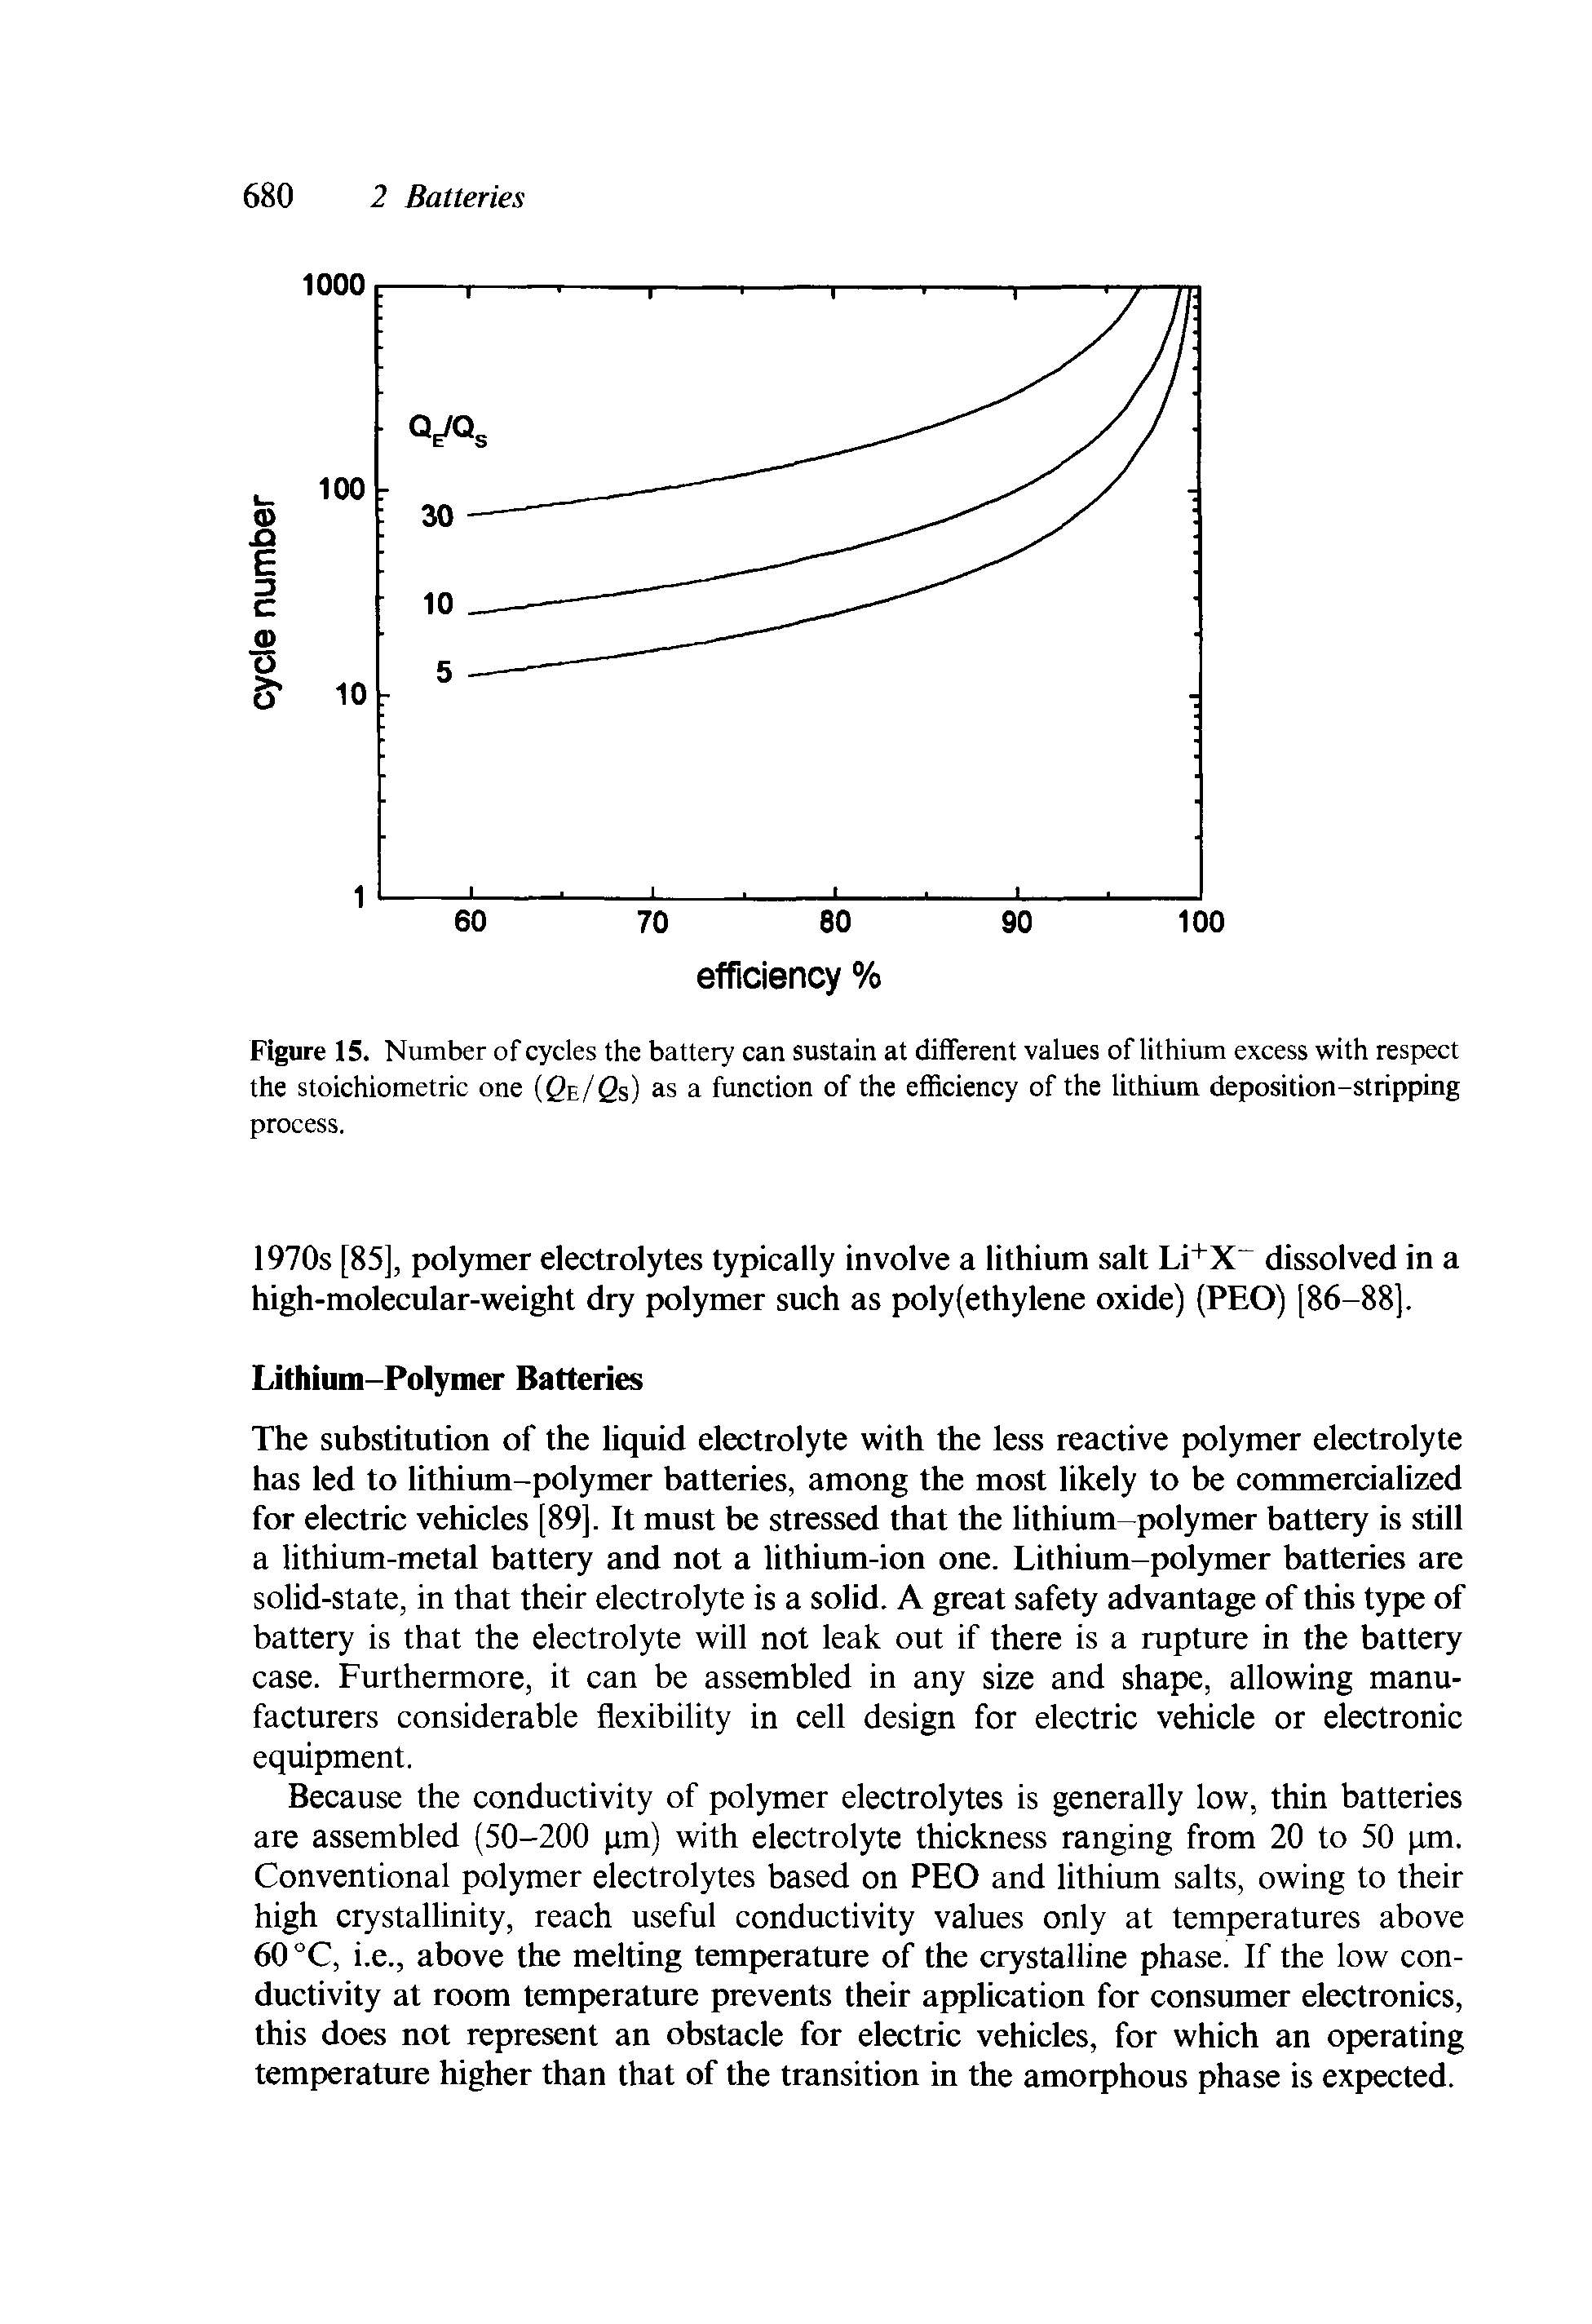 Figure 15. Number of cycles the battery can sustain at different values of lithium excess with respect the stoichiometric one (2e/2s) as a function of the efficiency of the lithium deposition-stripping process.